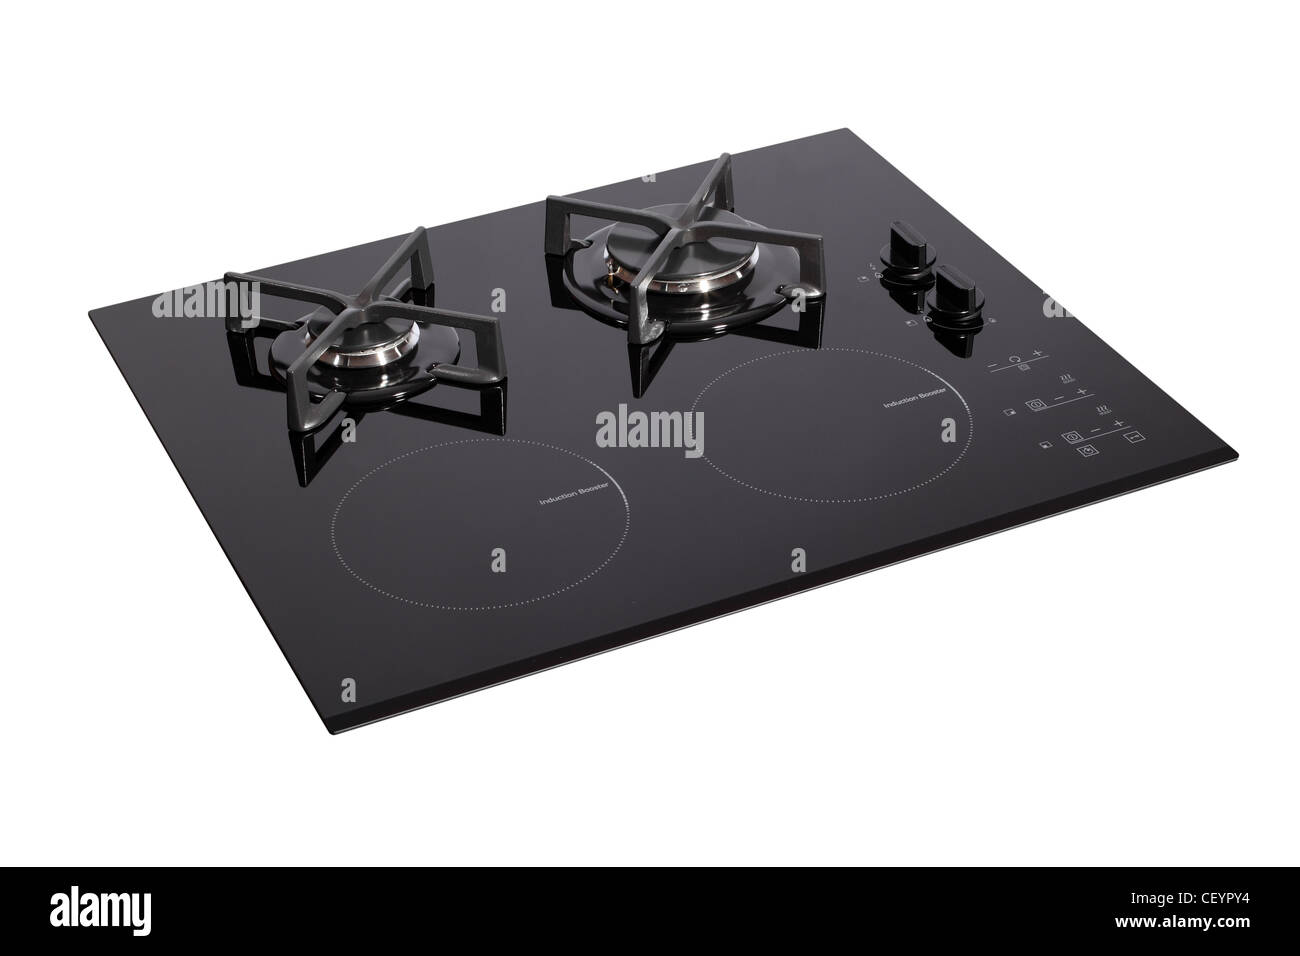 Black glass gas and induction hob Stock Photo - Alamy